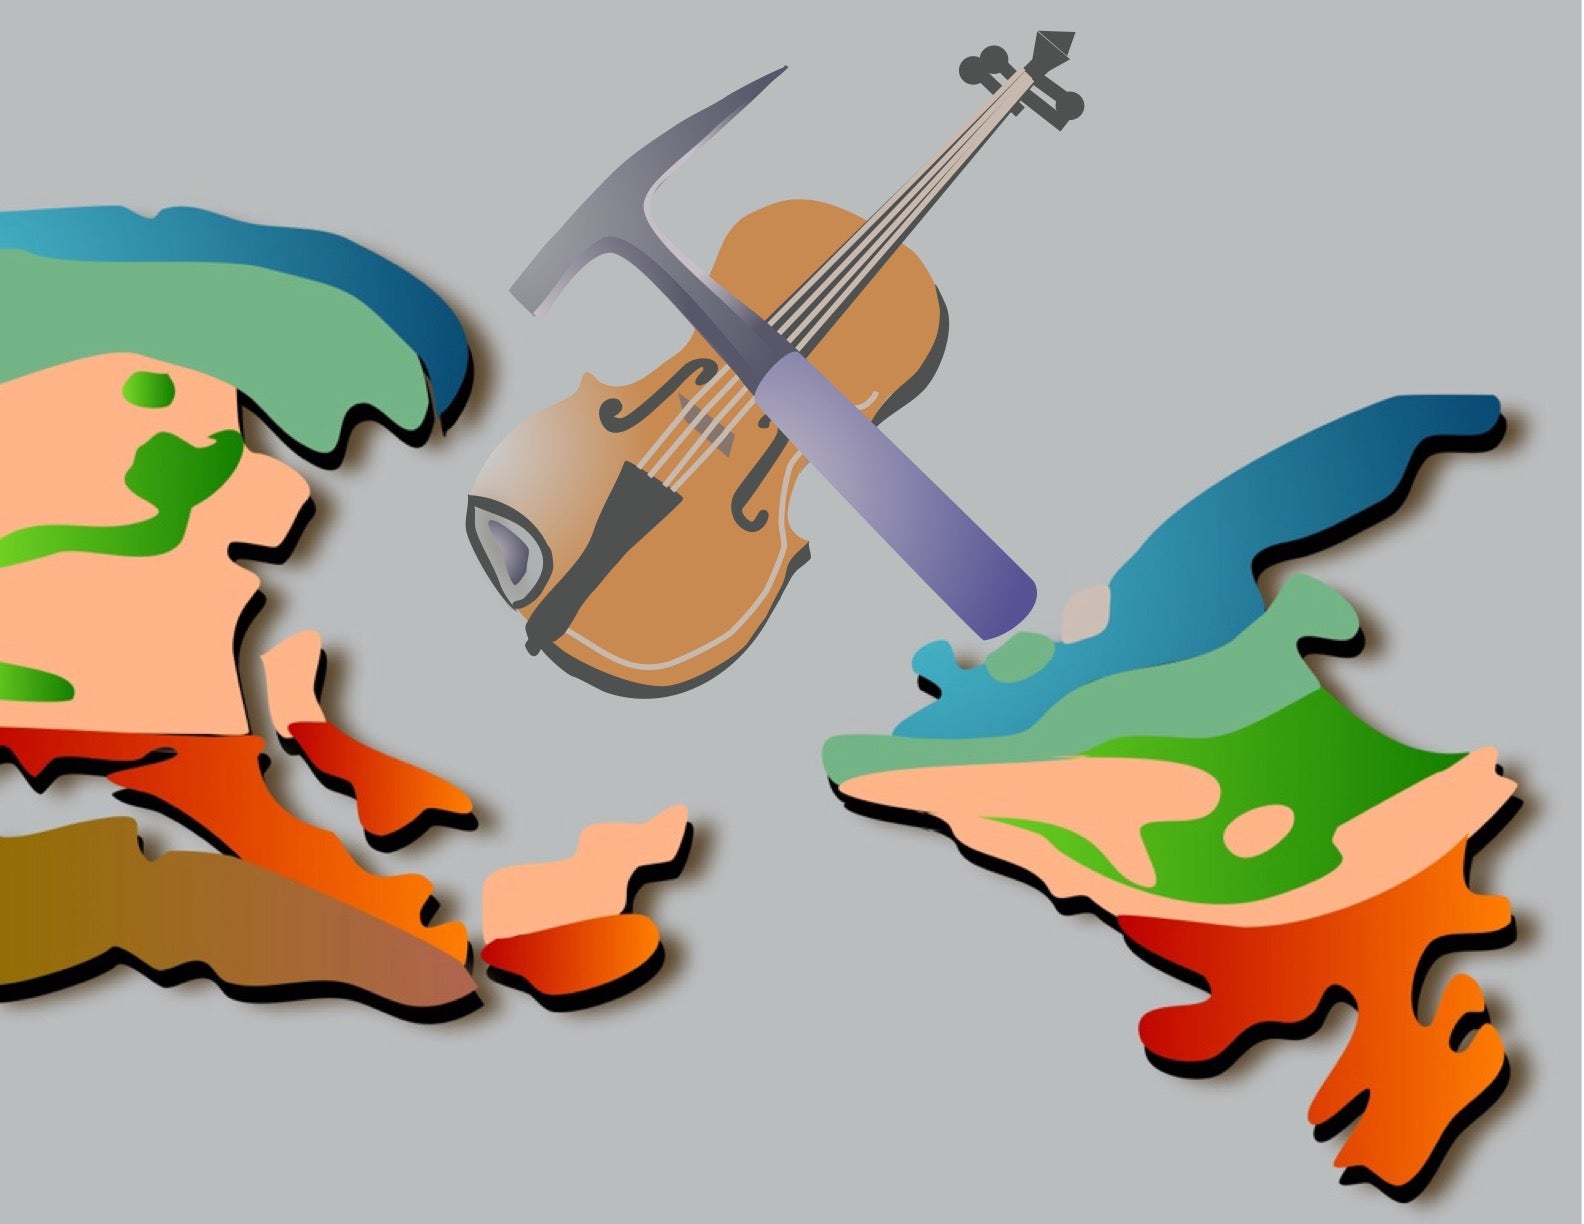 Illustration of Newfoundland and Laborador topopgraphy with a fiddle and rock hammer bow